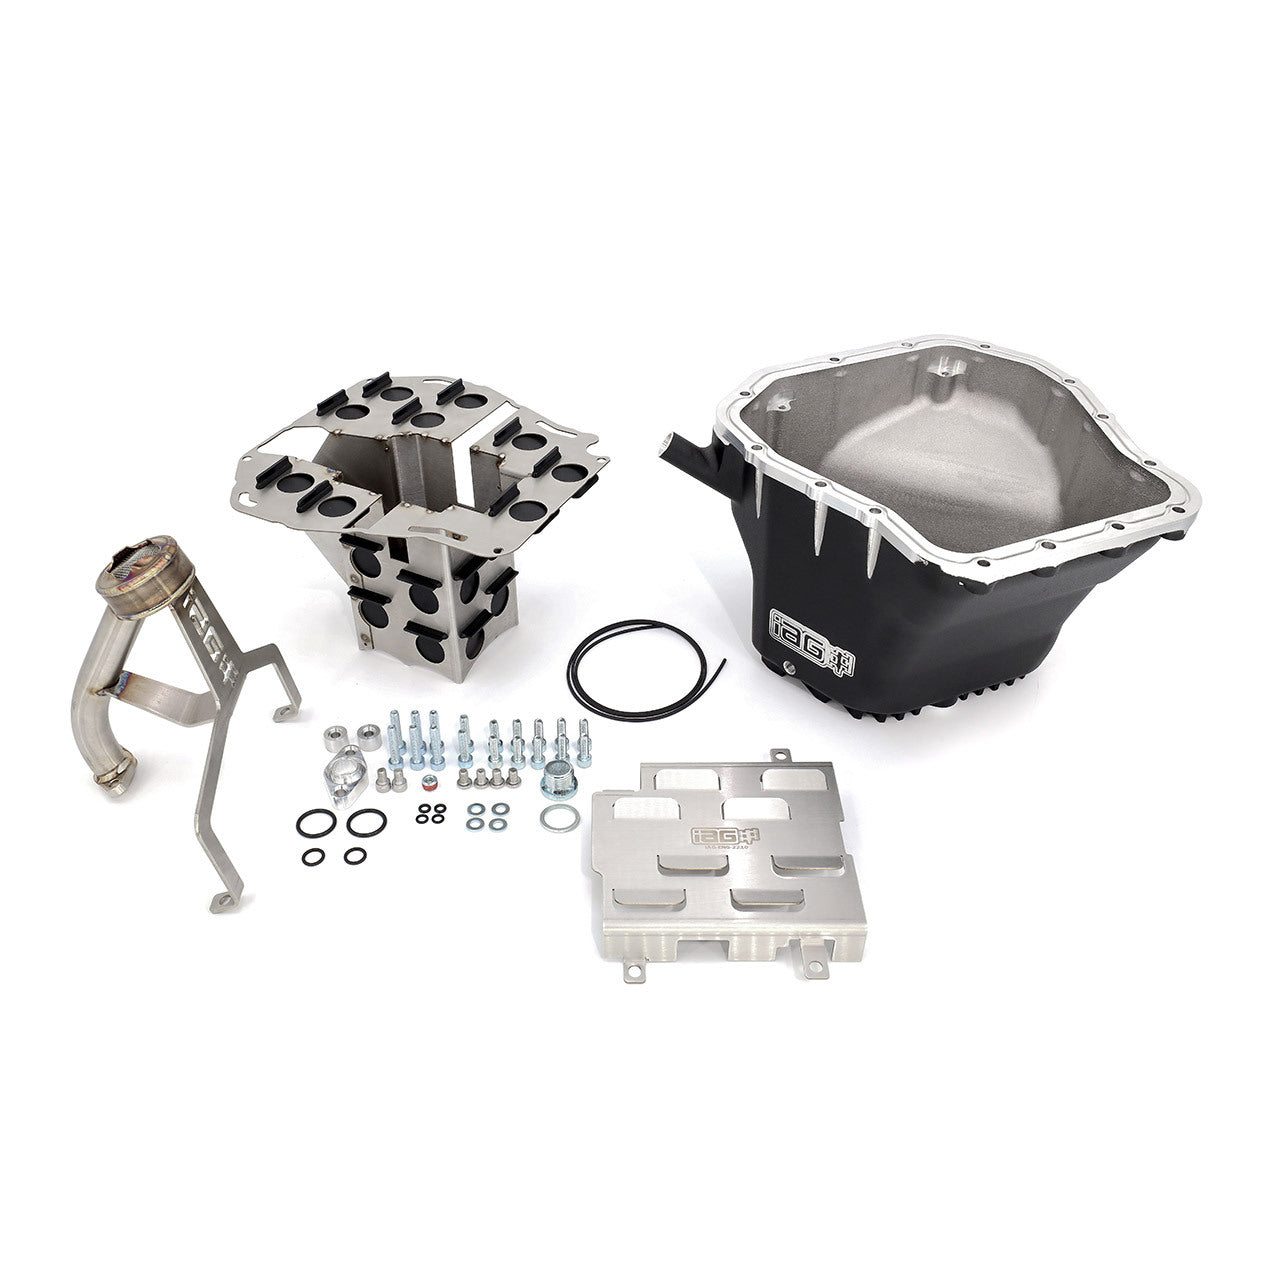 IAG EJ Competition Series Oil Pan Package (Silver Pan / Pickup / Comp Baffle / Windage Tray) For WRX, STI, LGT, FXT on Bleeding Tarmac